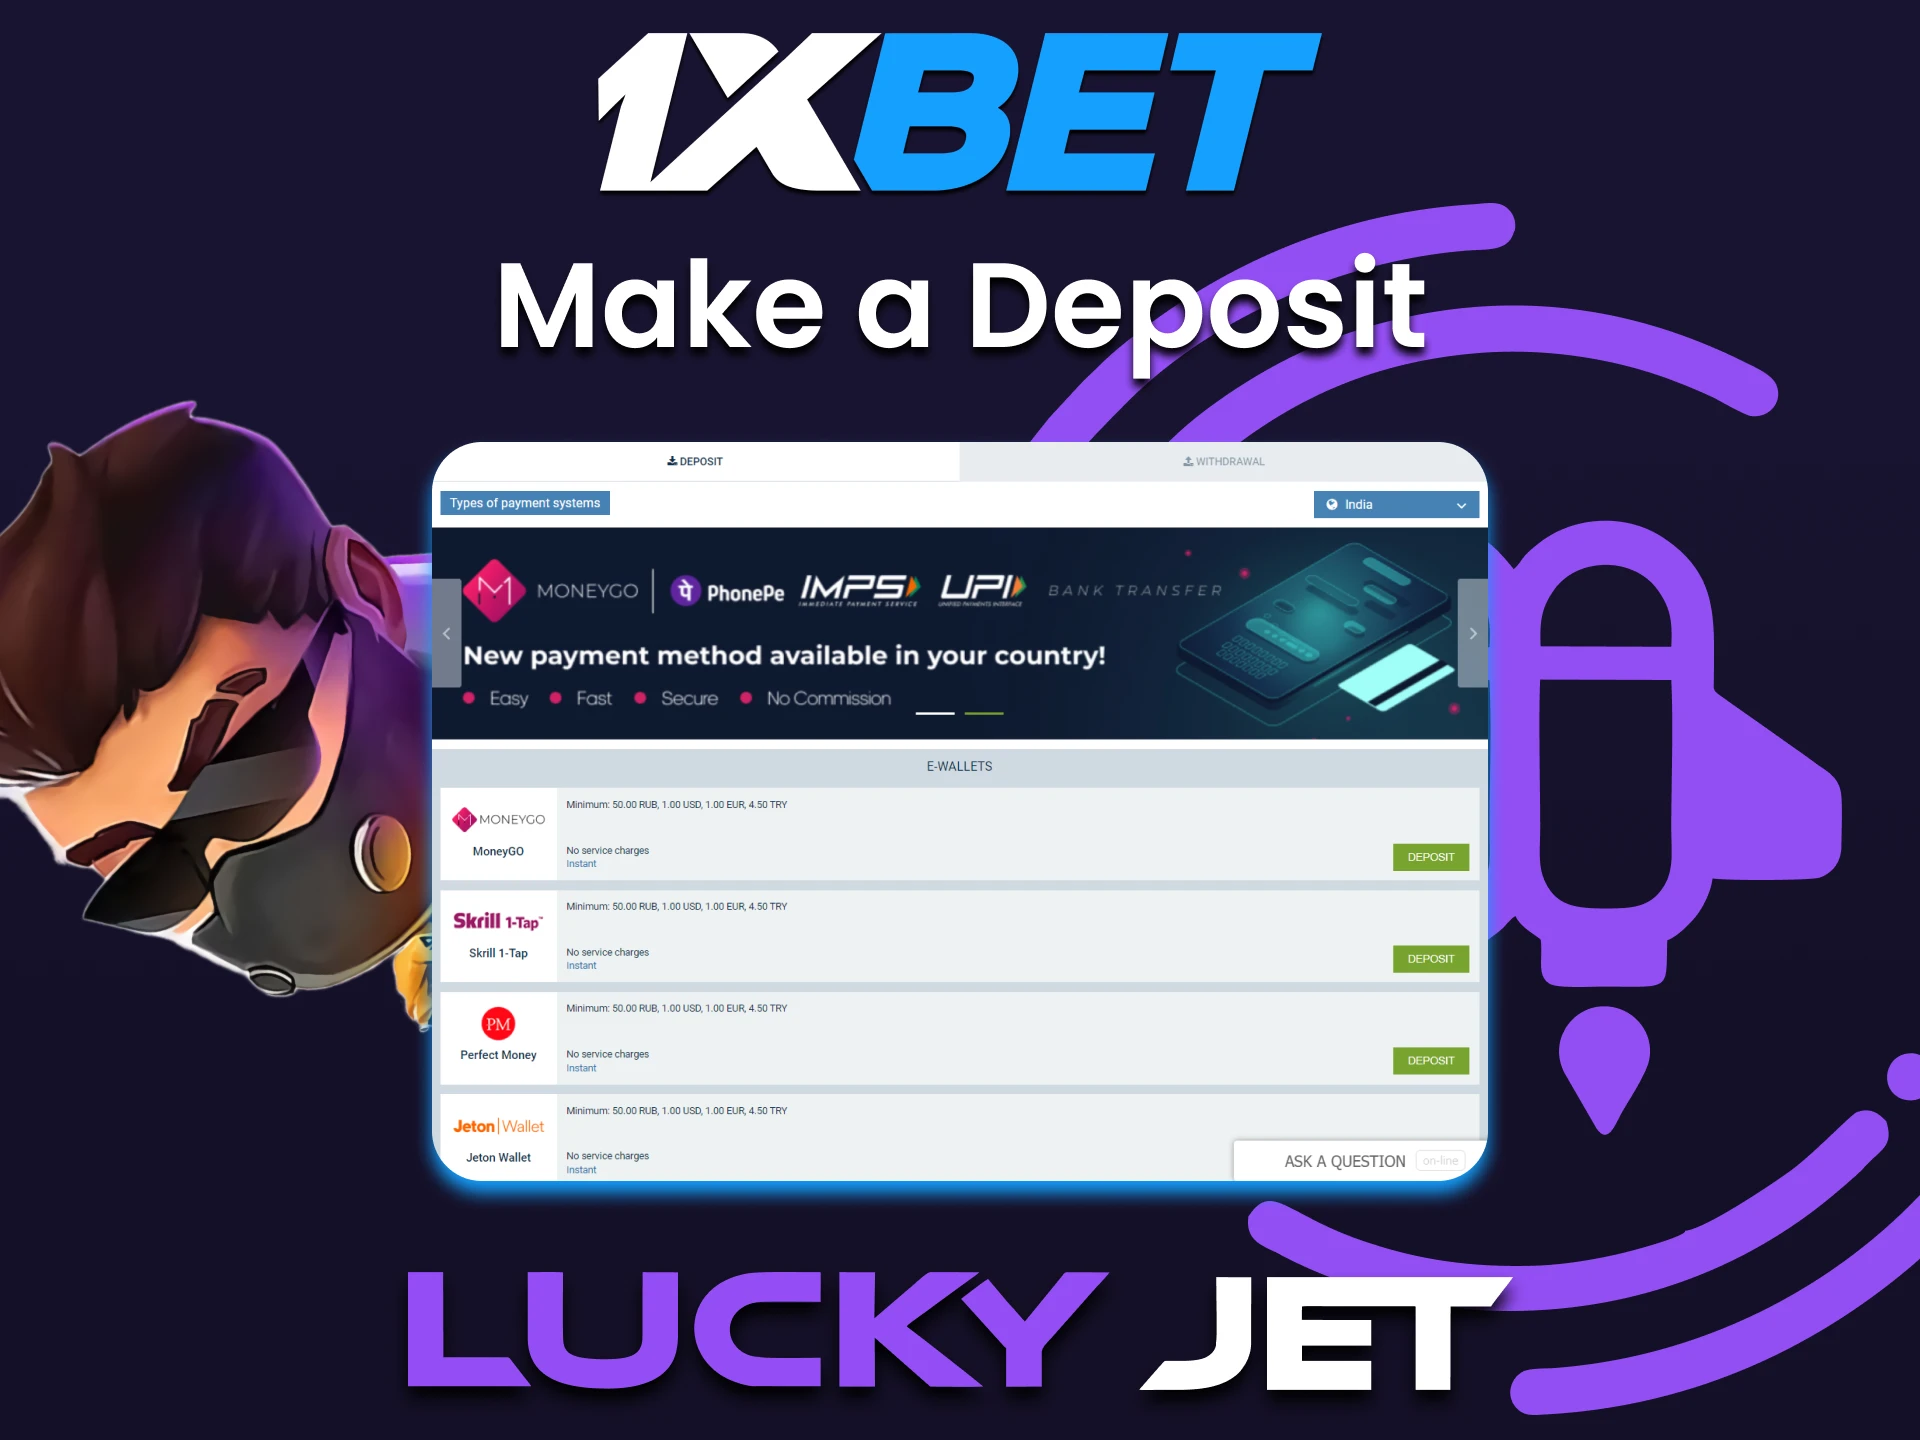 To play Lucky Jet, you need to deposit funds to 1xbet.